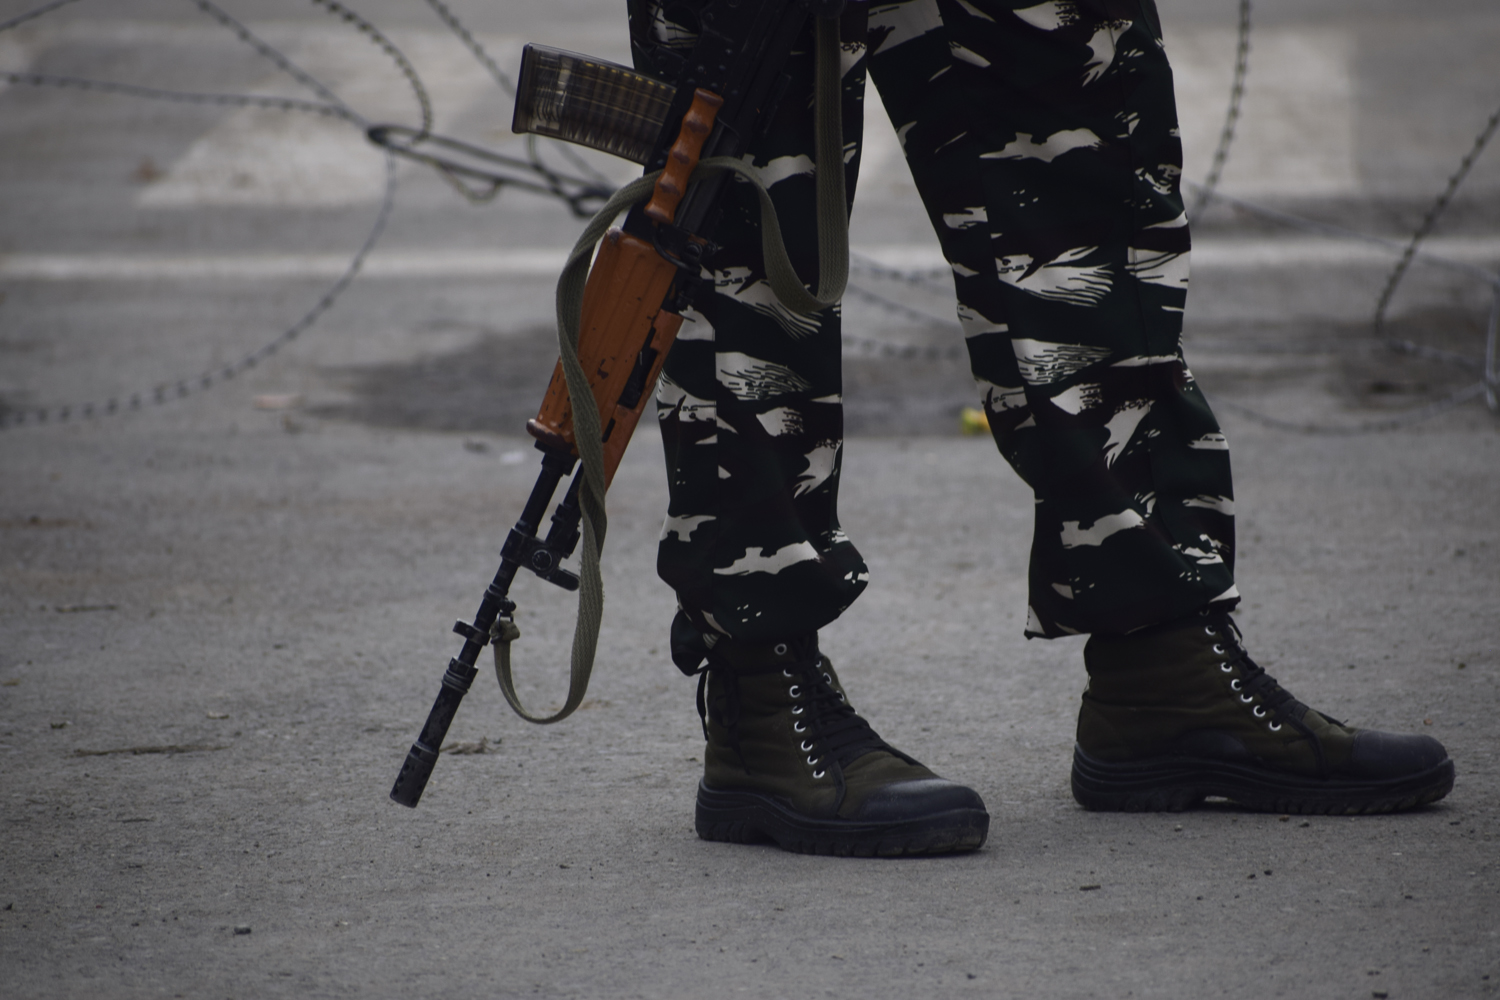 In Shopian, a contest is on between militants and security forces to control the streets